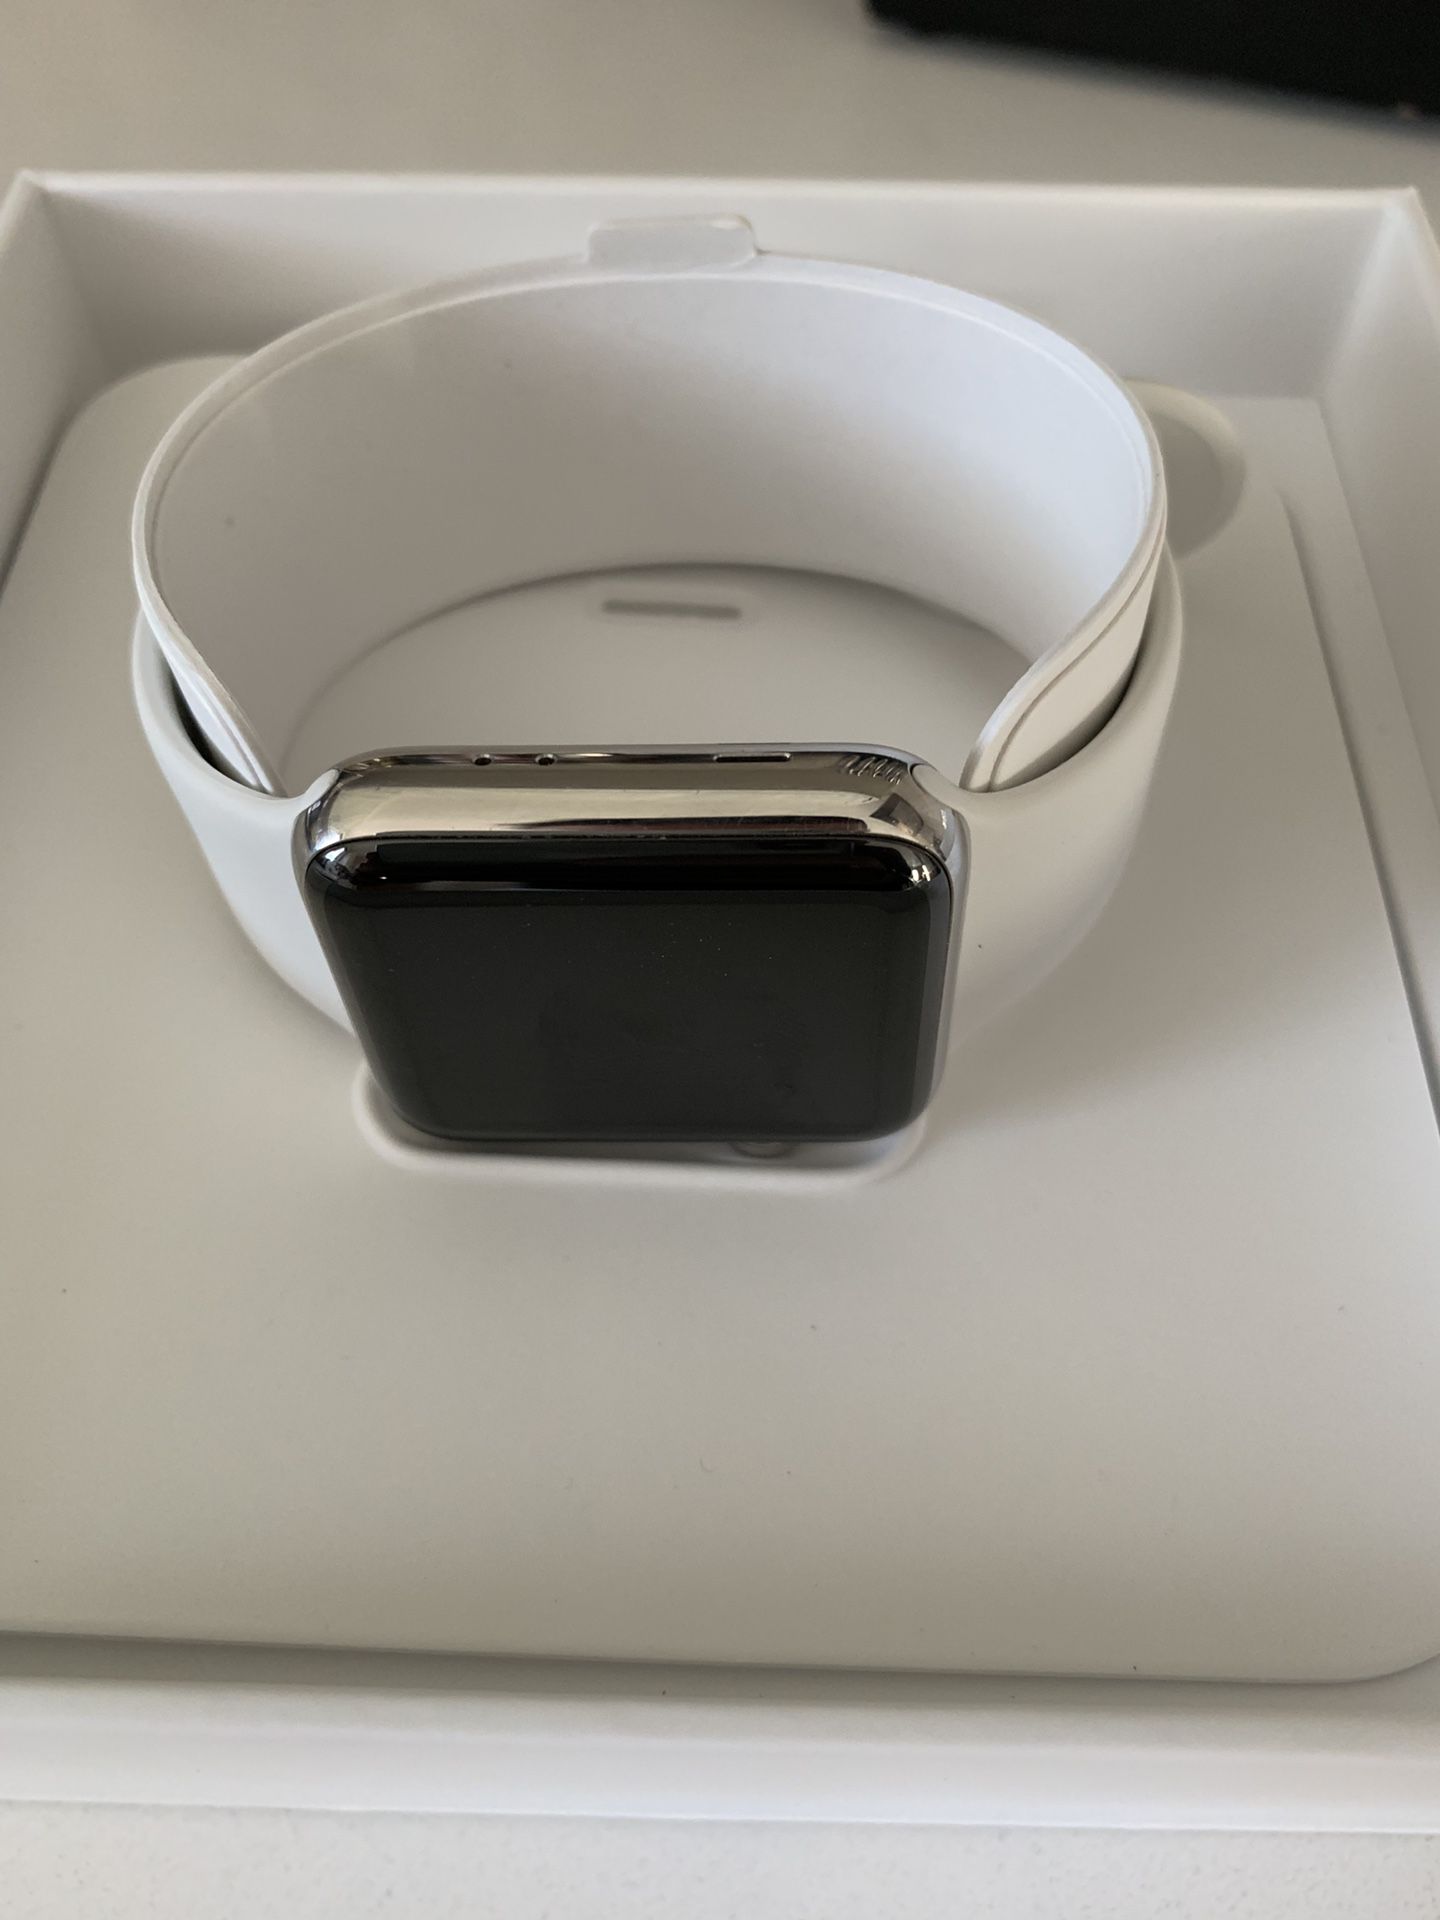 Apple Watch series 3 stainless steel 42mm w/Cellular